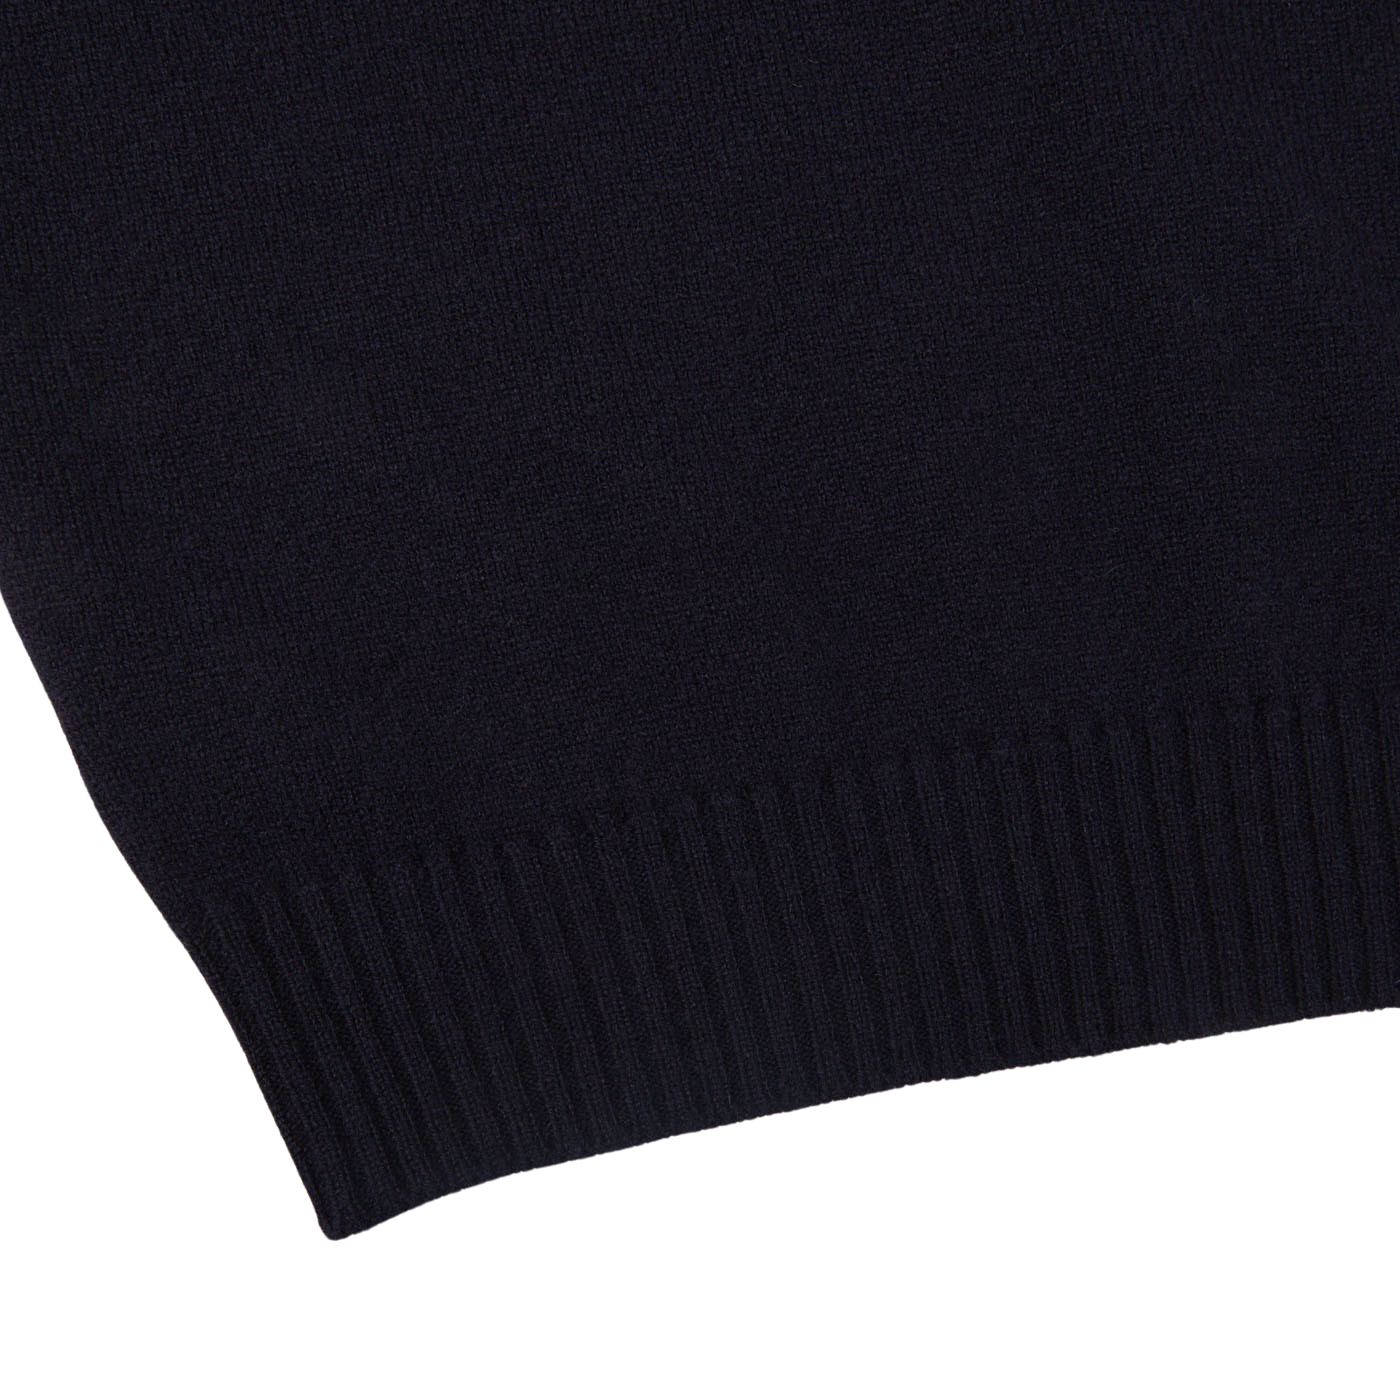 A close up of a Navy Crewneck Lambswool Sweater from William Lockie, perfect for layering.